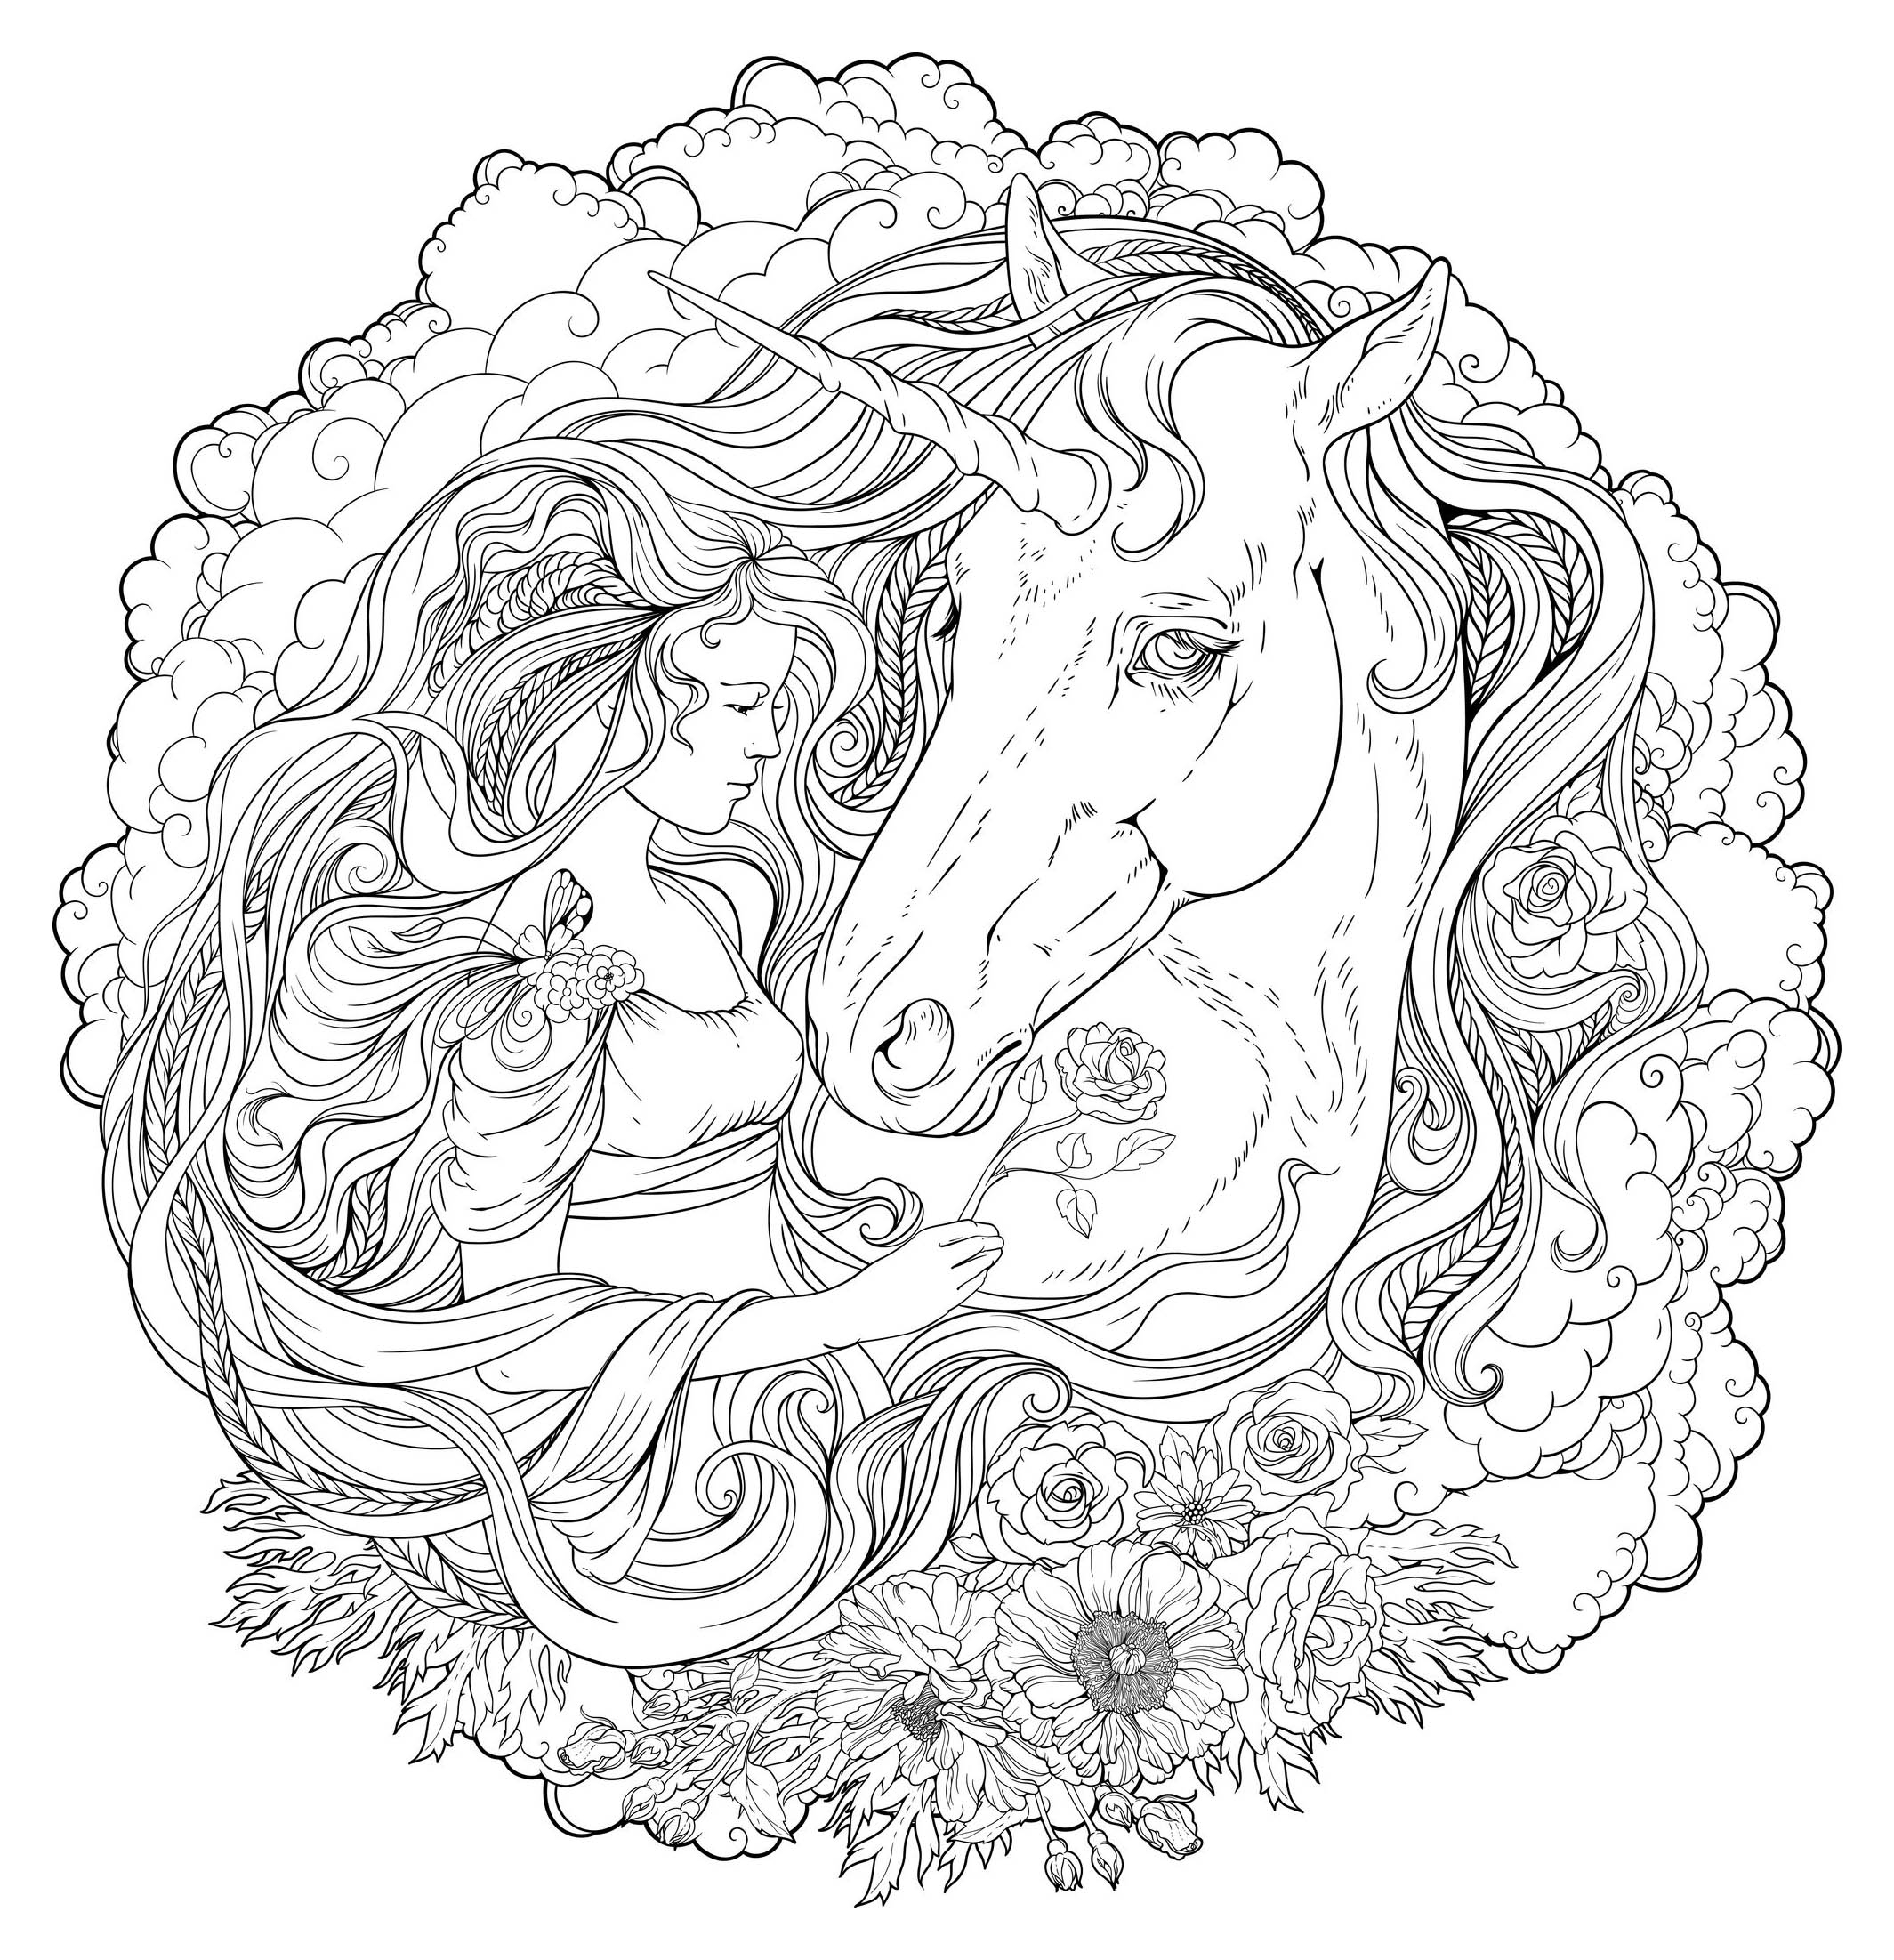 Unicorn And Girl In The Clouds - Mandalas With Characters encequiconcerne Mandala Fée